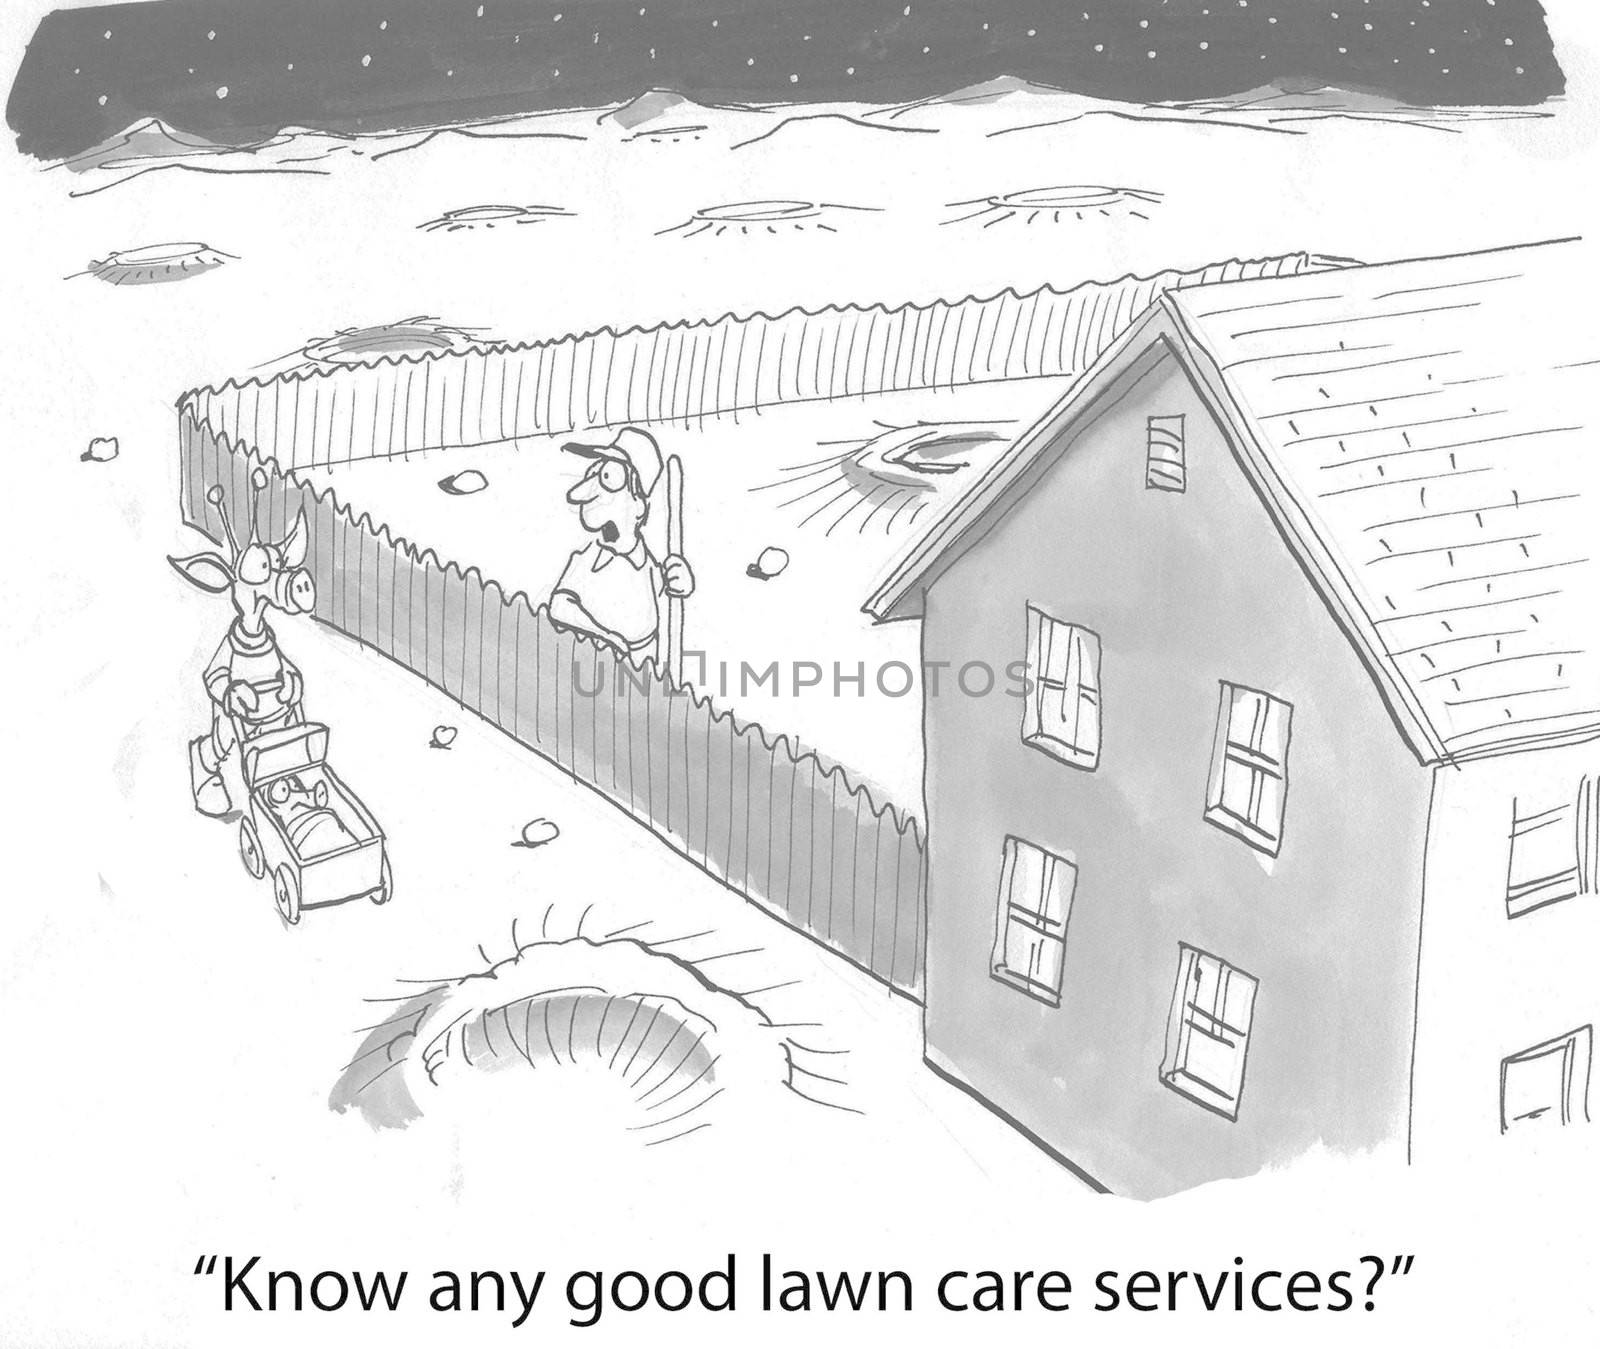 Lawn Care by andrewgenn